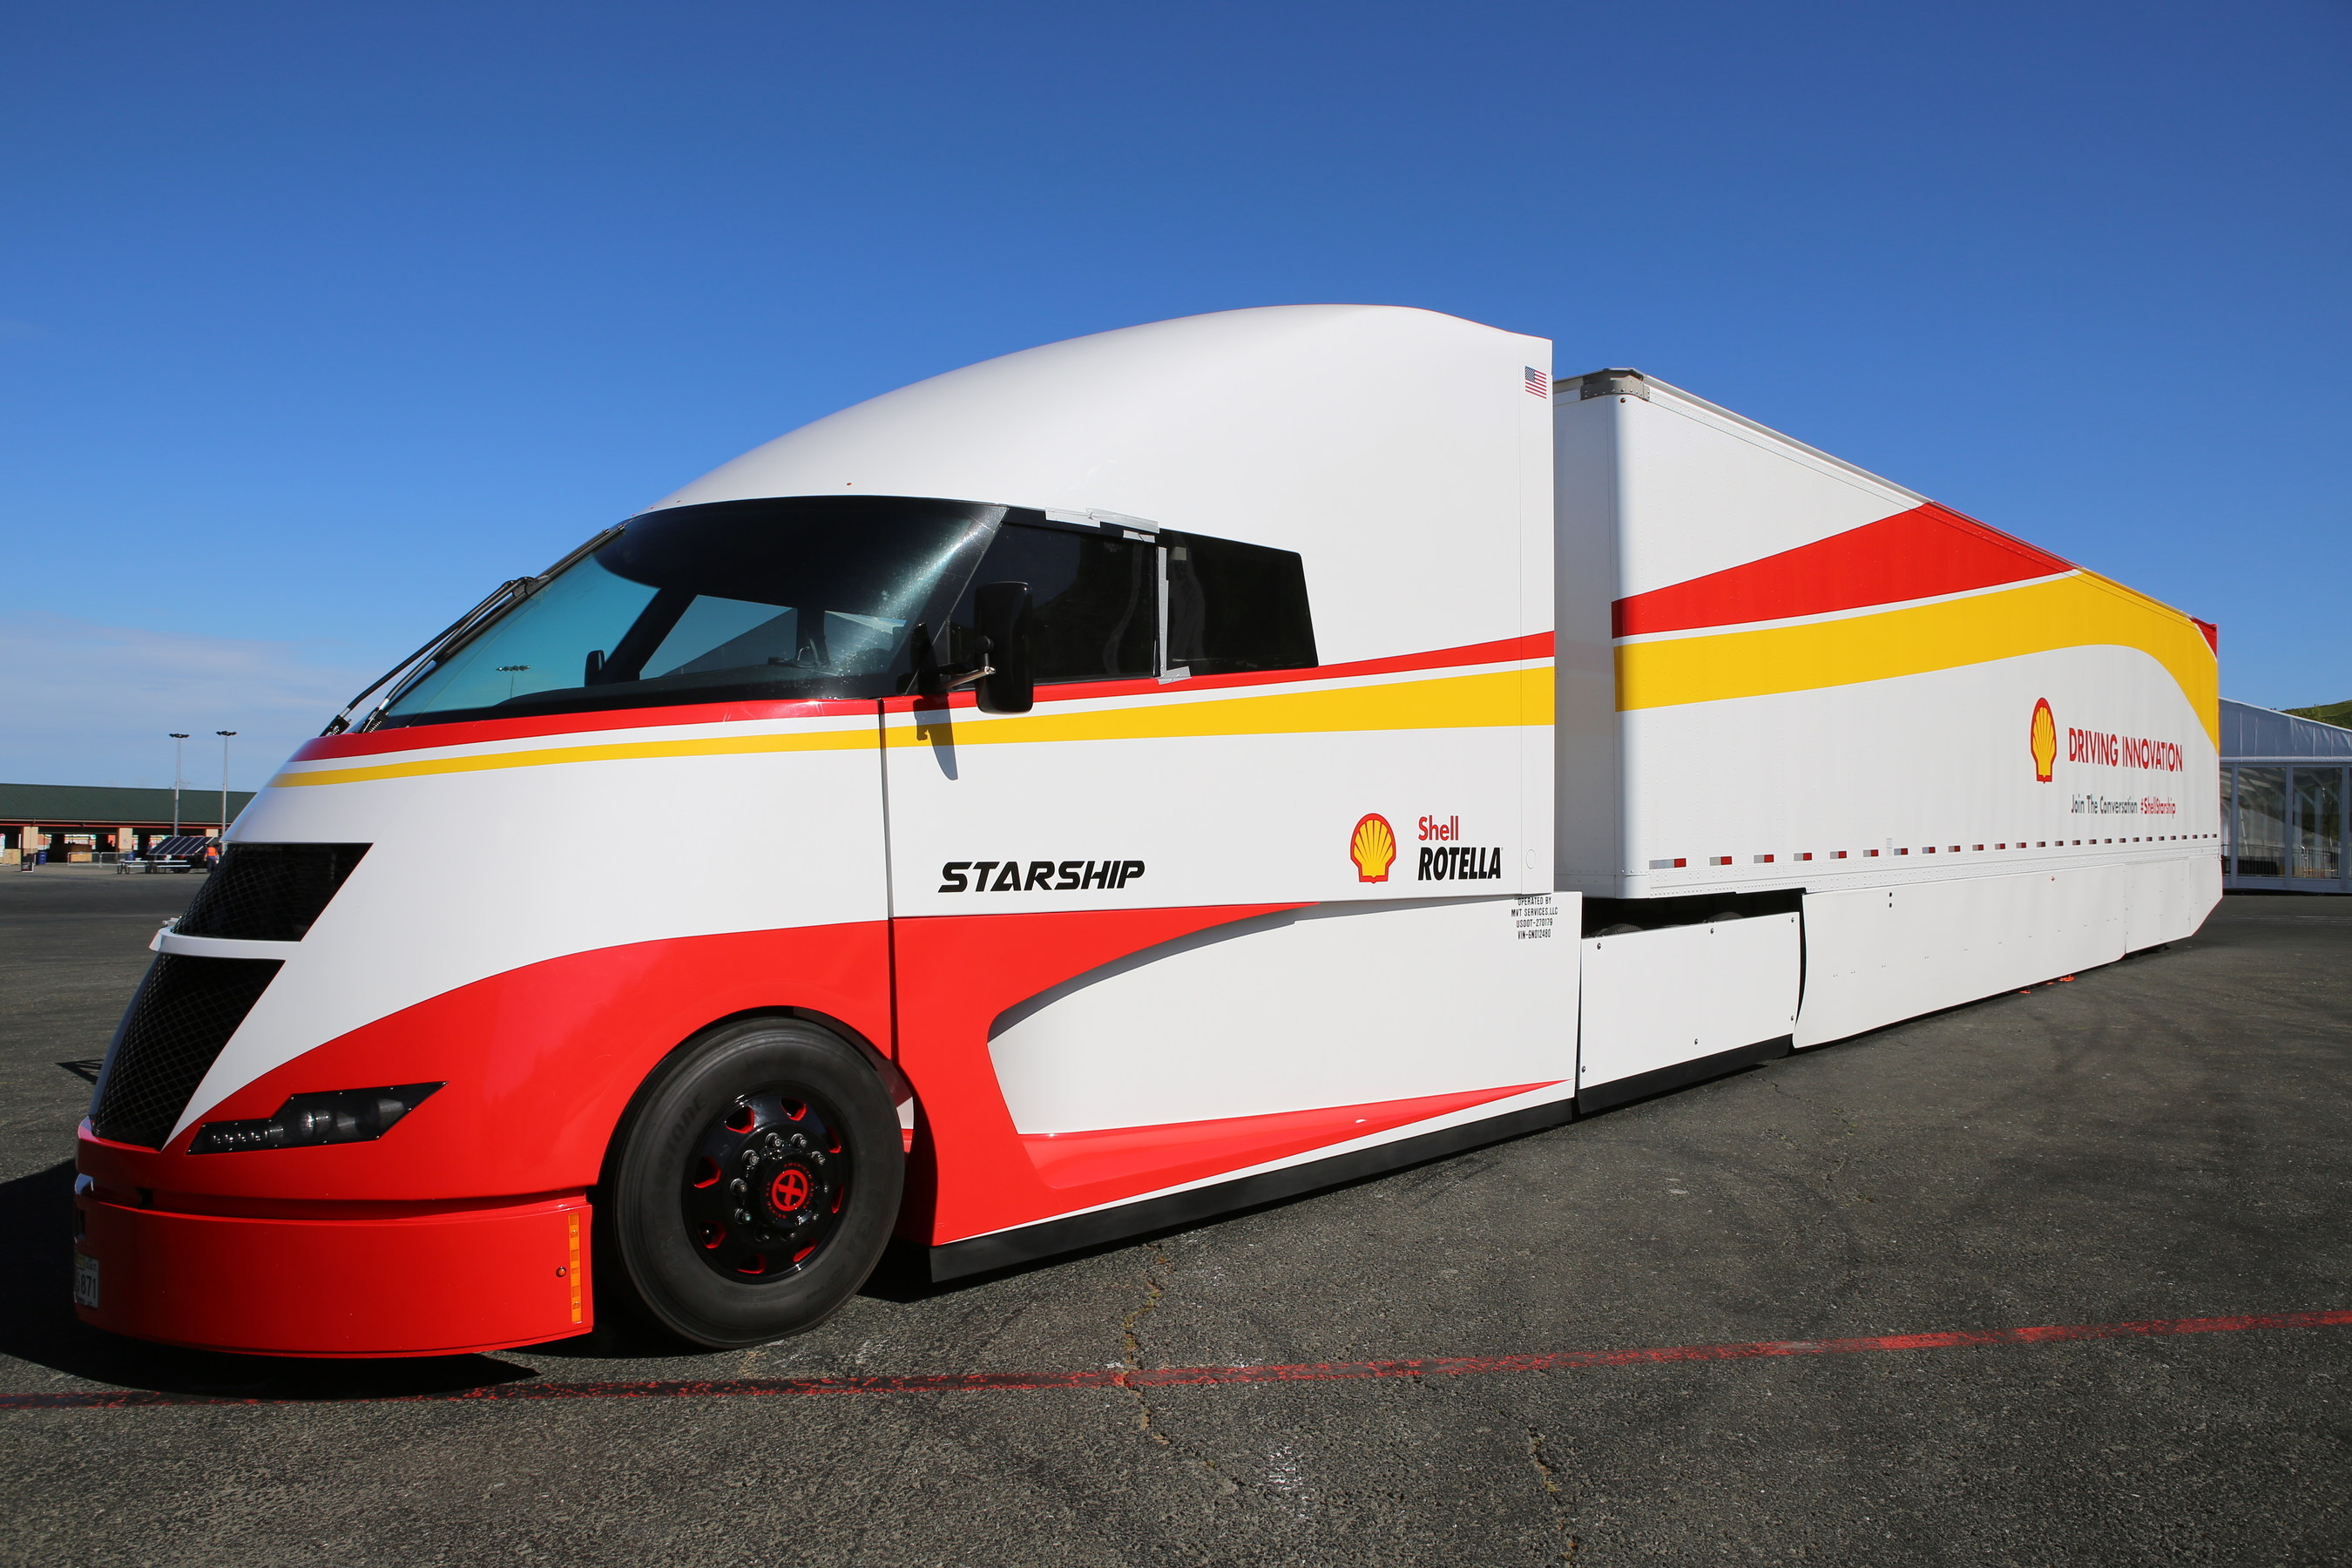 Futuristic Shell Starship truck prepares to take off across country ...